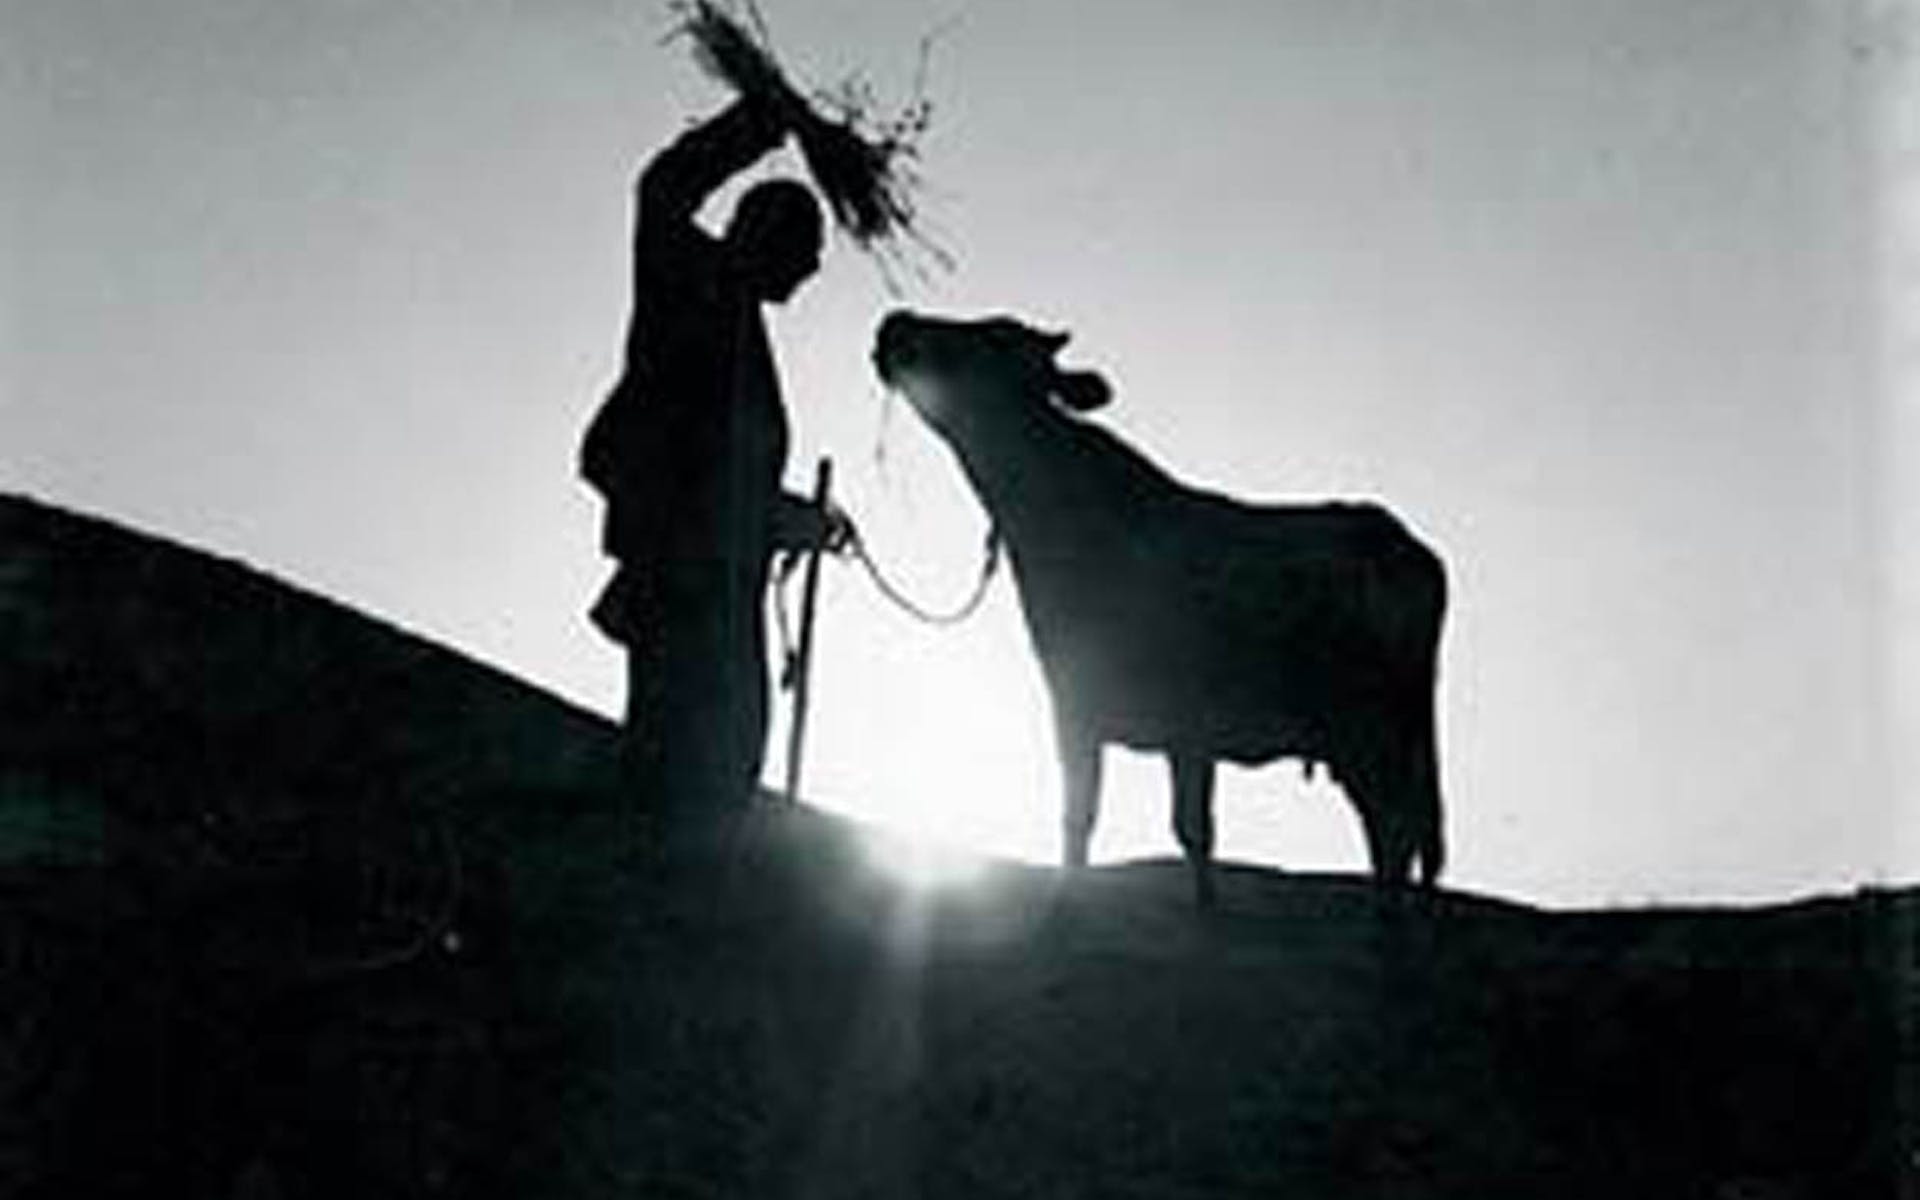 Fuzzy black and white image of a man holding hay up to a cow.